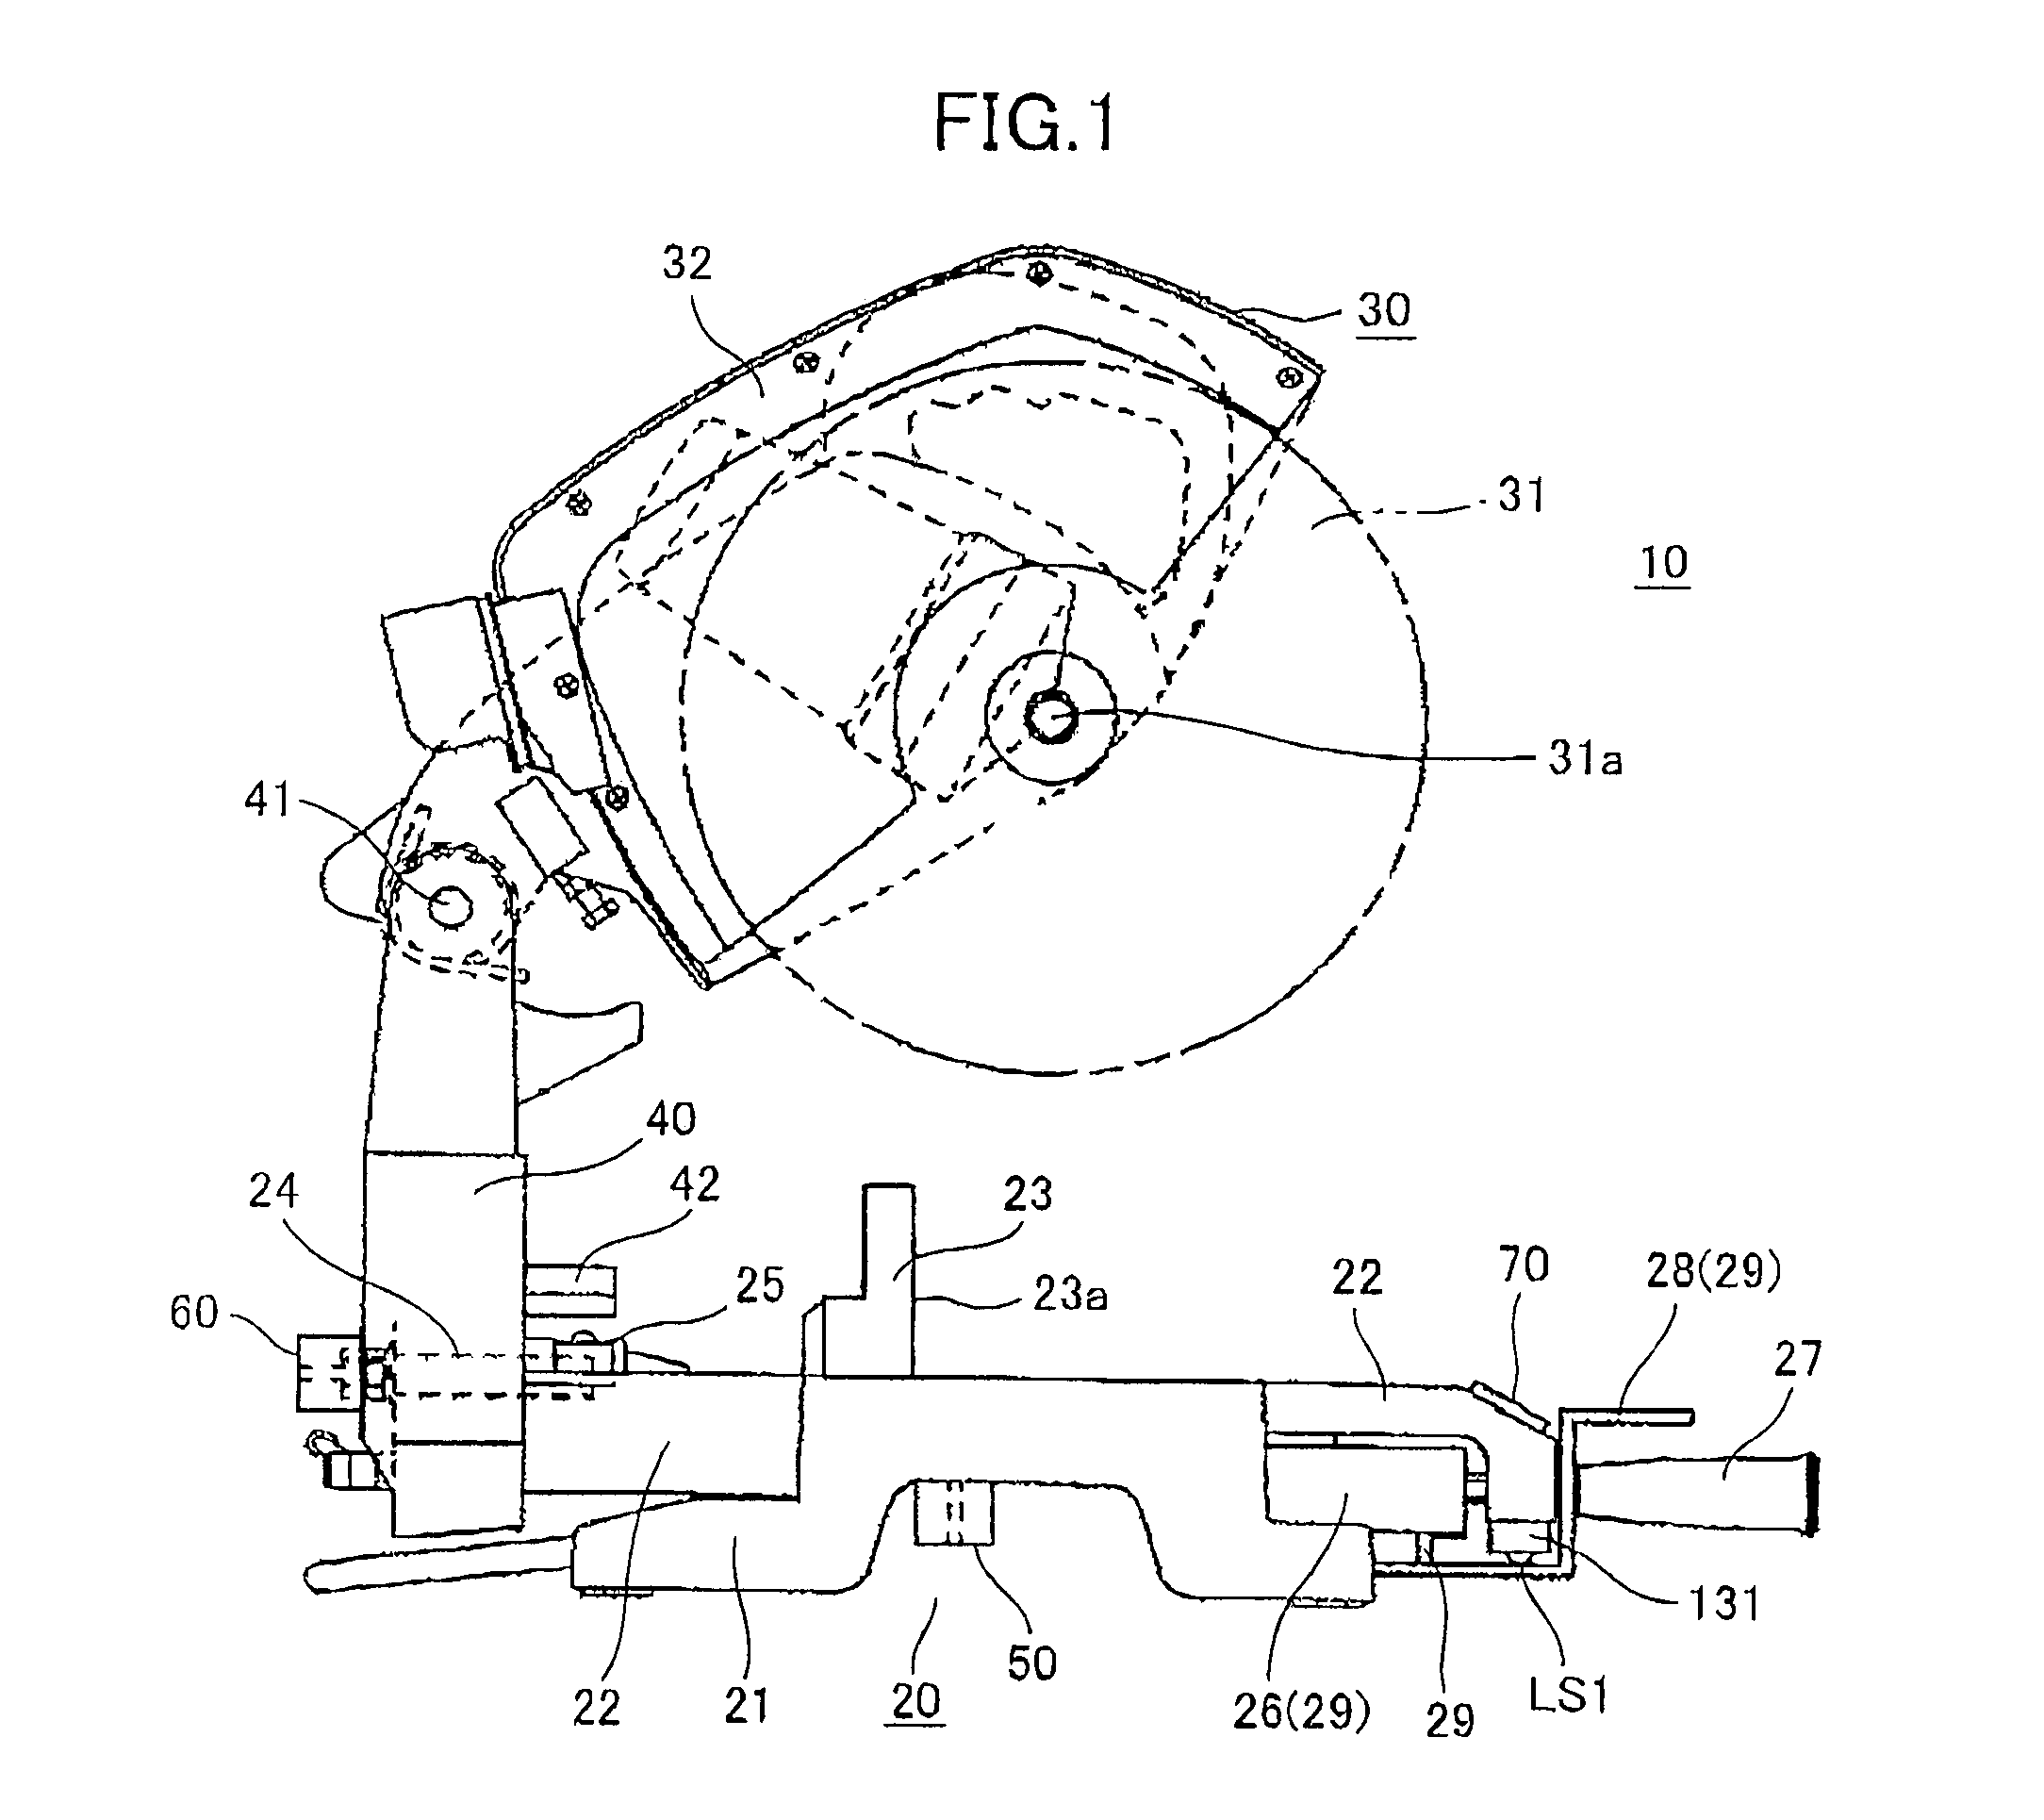 Miter saw for displaying angle of cutter blade cutting workpiece